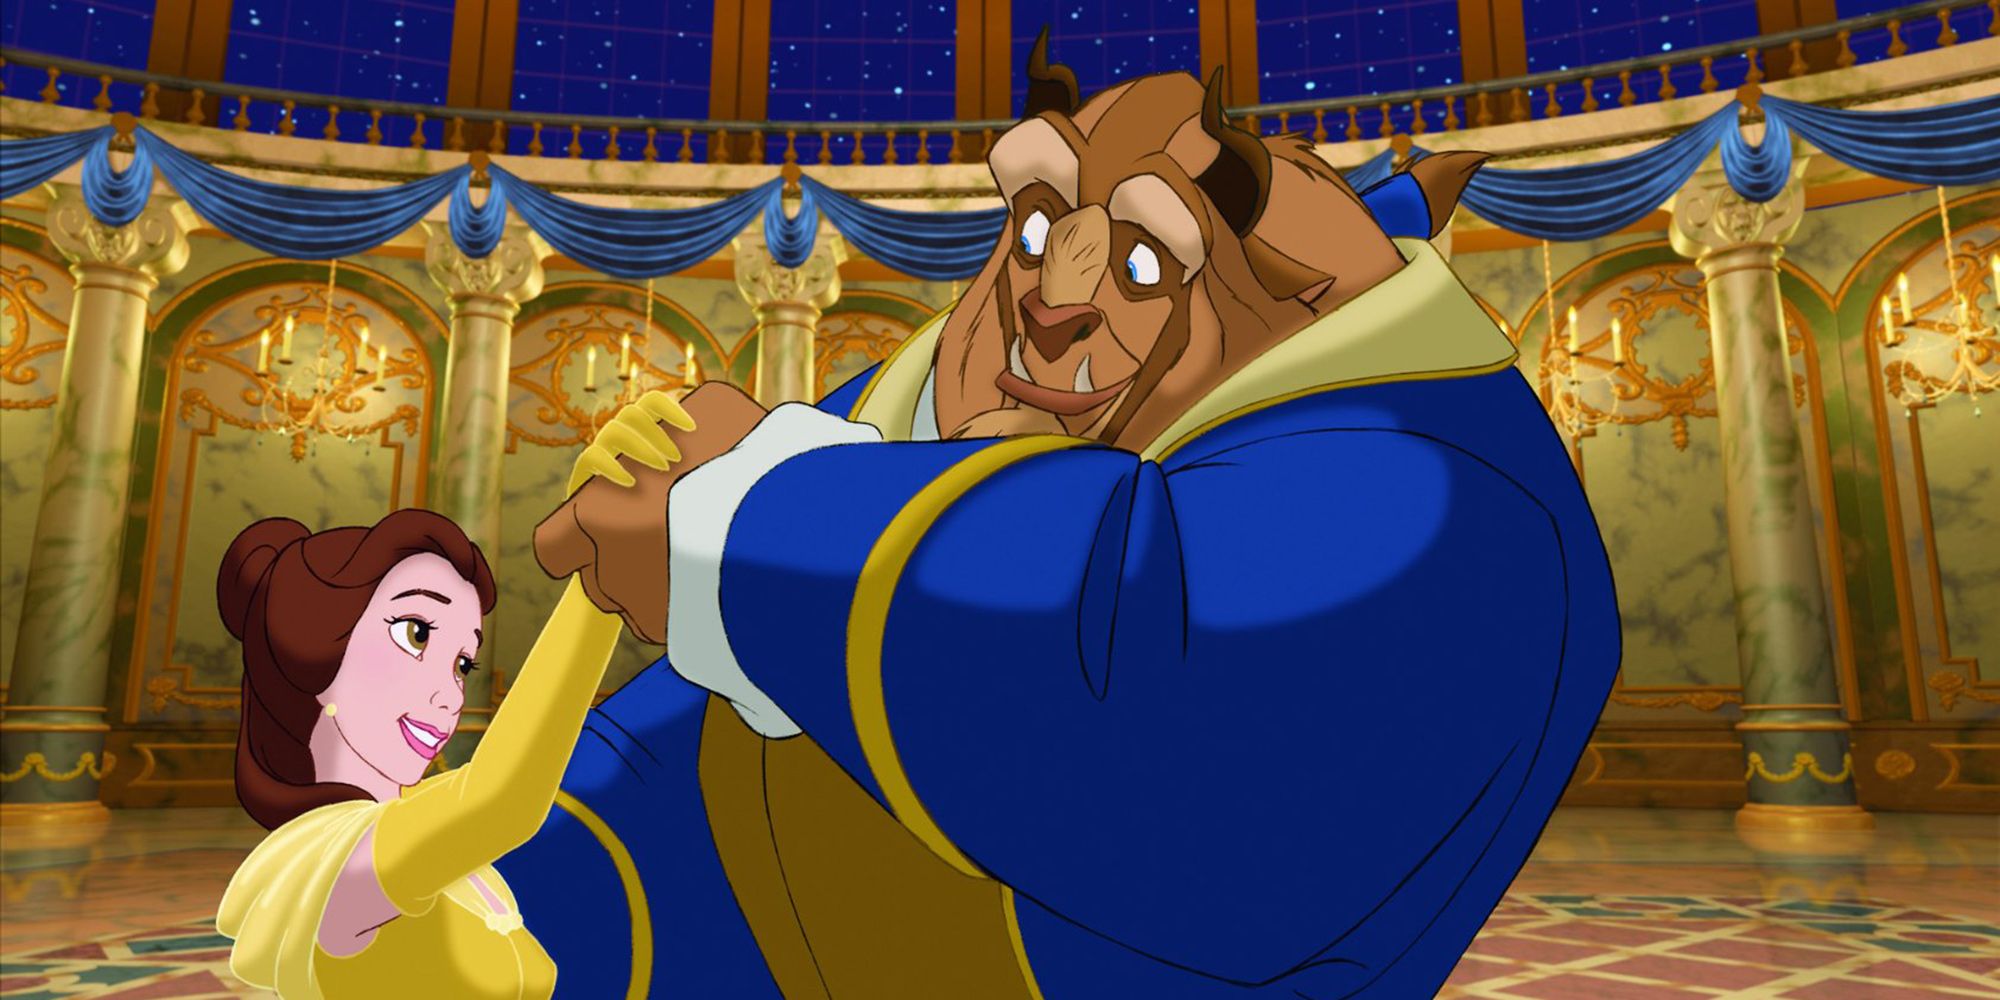 15 Reasons The Original Beauty And The Beast Is Better ...